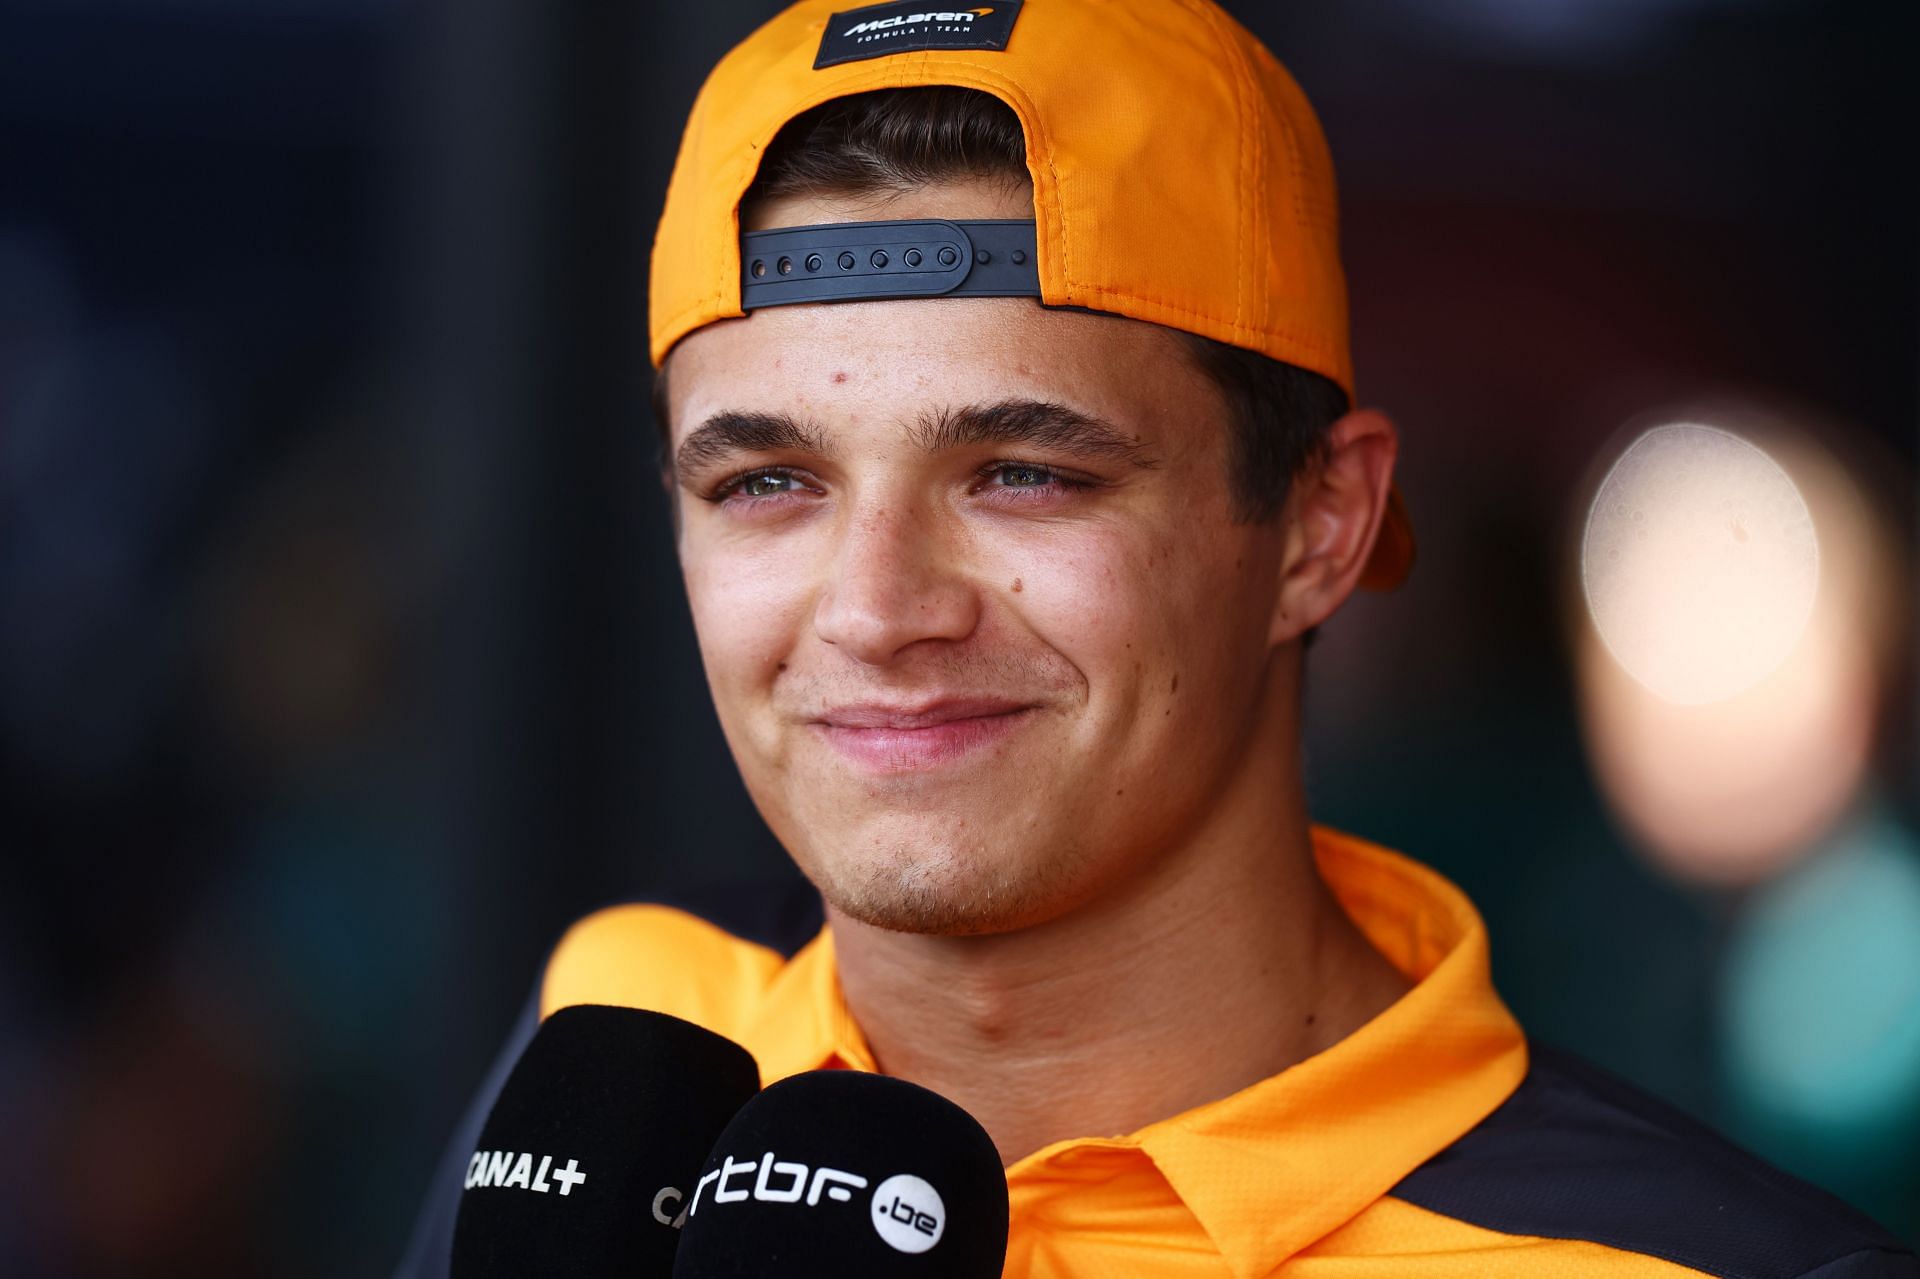 Lando Norris: 'You want to be able to race but you have to drive at 95%', McLaren